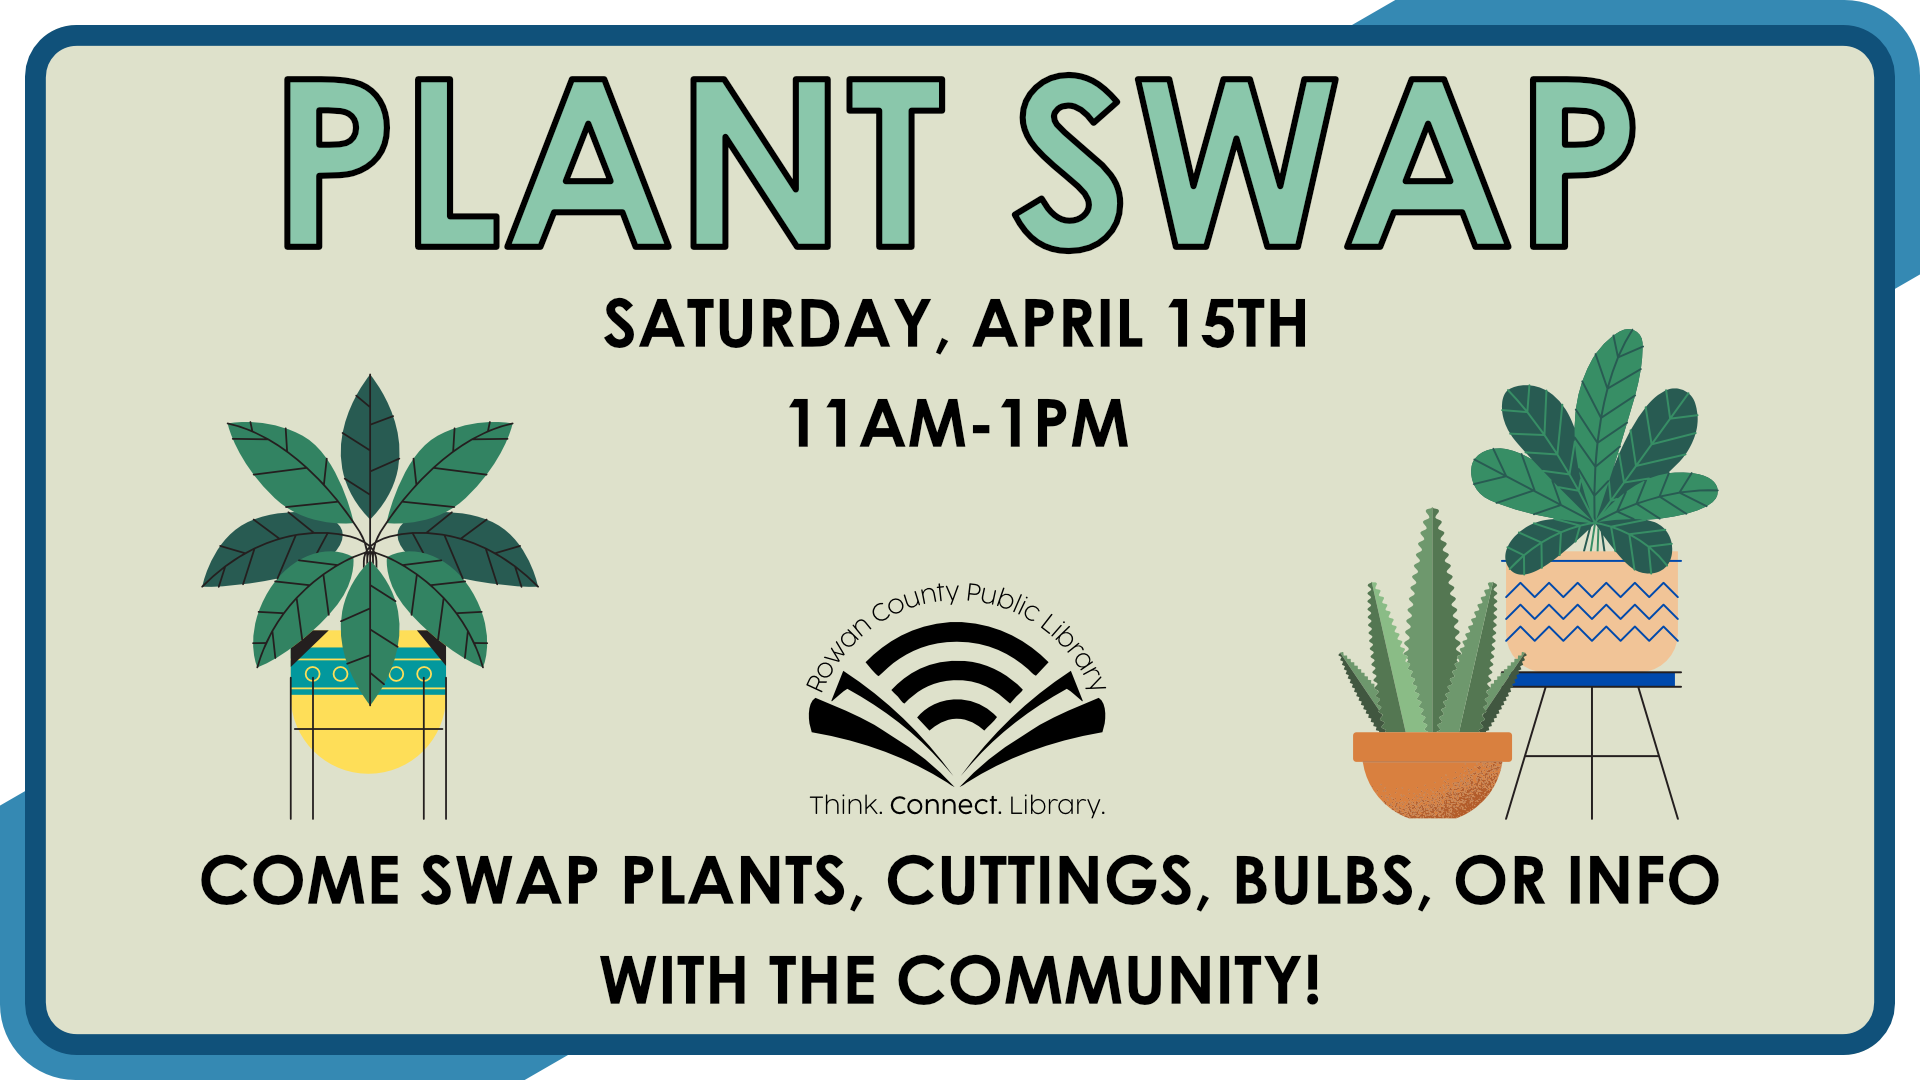 Plant Swap, April 15th at 11am, intended for all ages